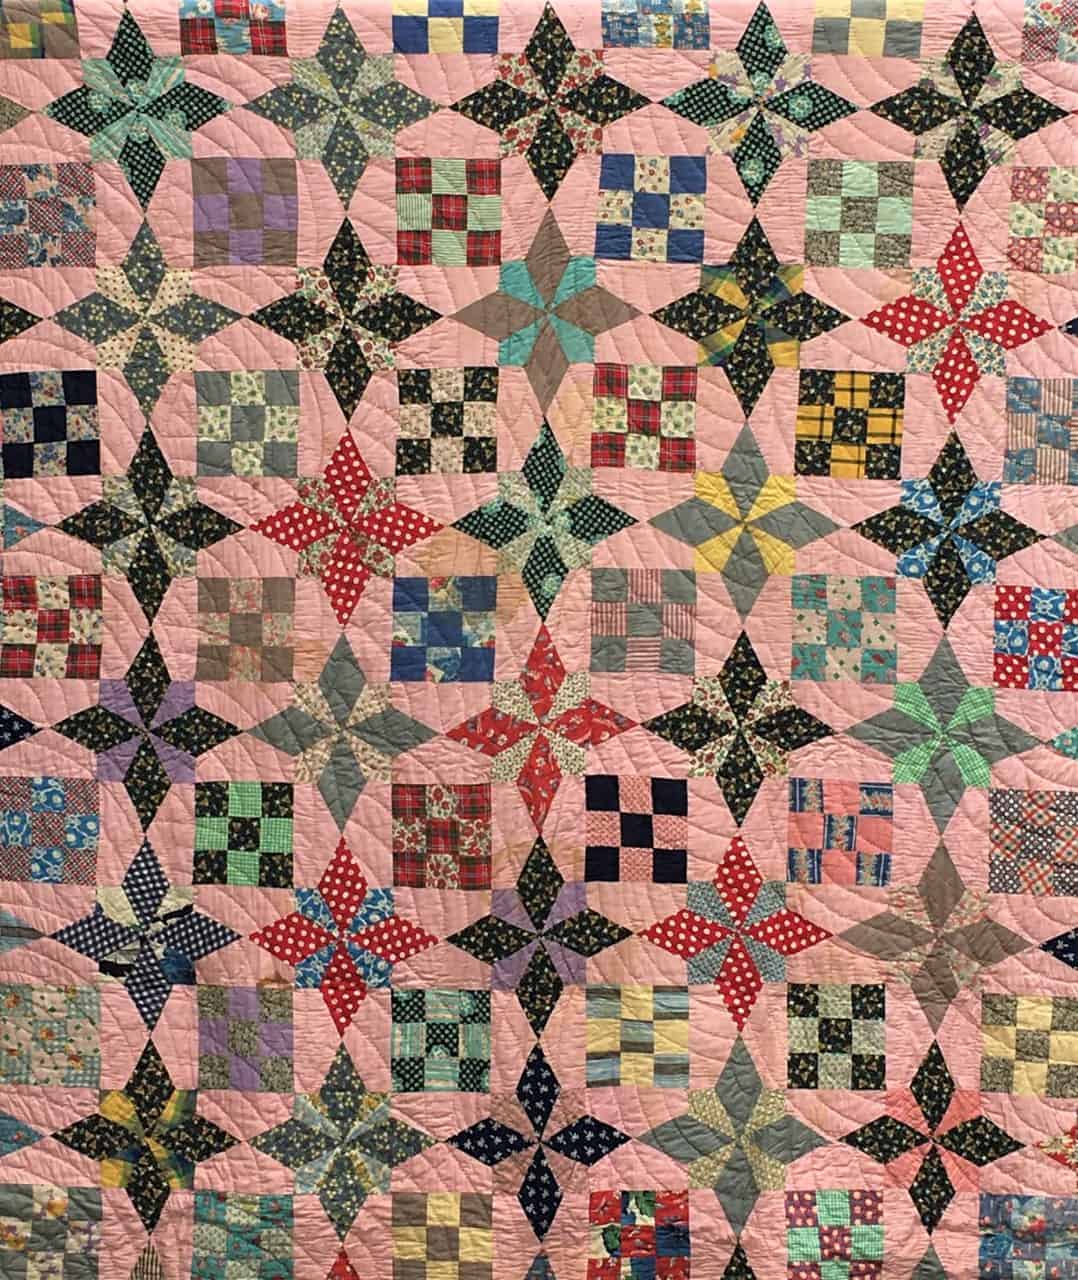 A combination of Nine Patch and star patterns create this quilt.